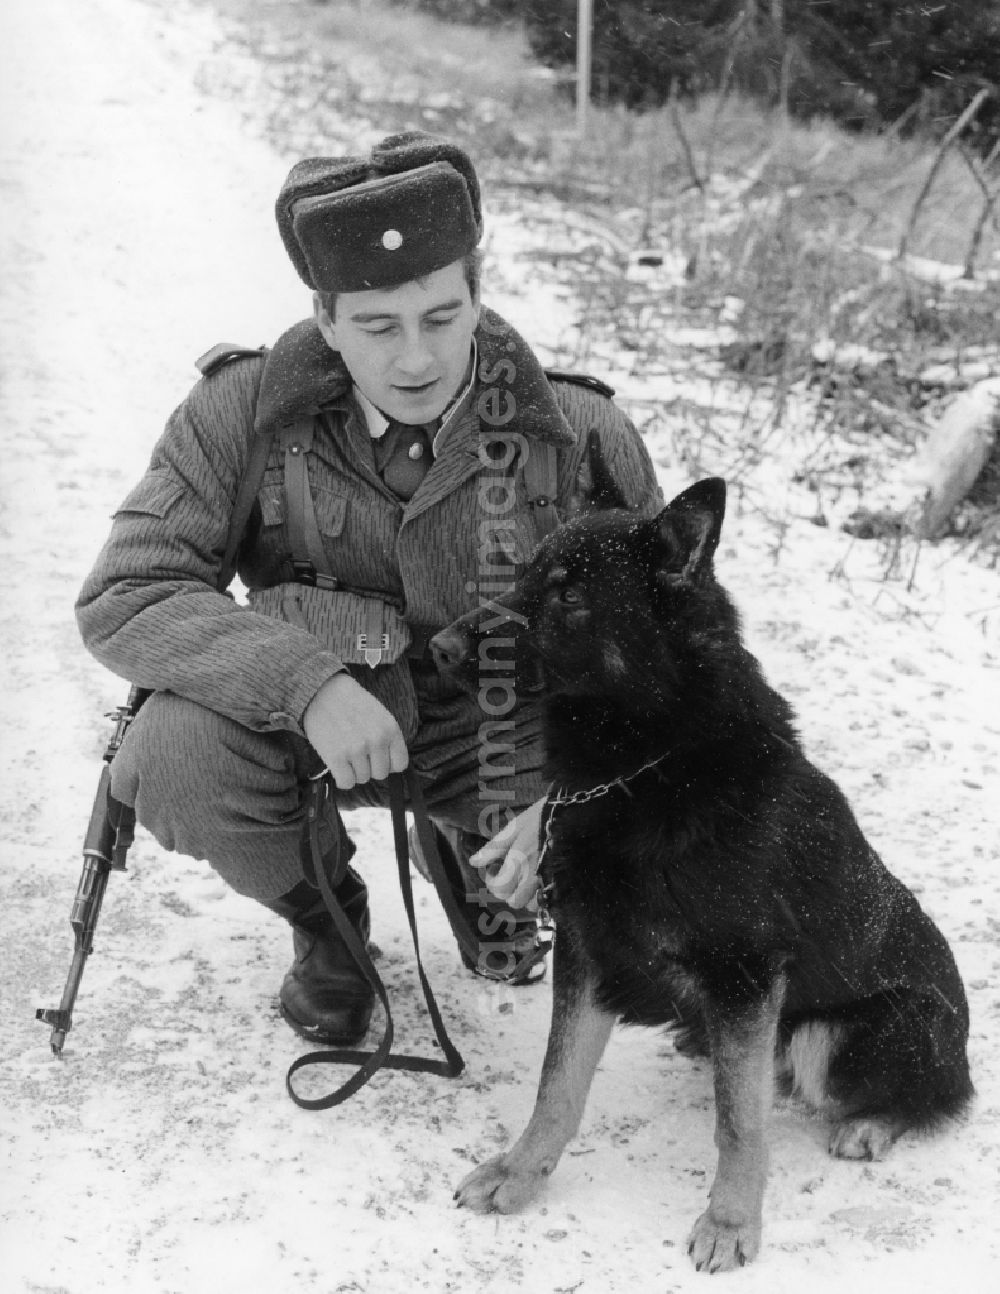 GDR photo archive: Abbenrode - Border Patrol with dog near Abbenrode in today's federal state of Saxony-Anhalt. Here to see a guard, equipped with machine gun AK-47